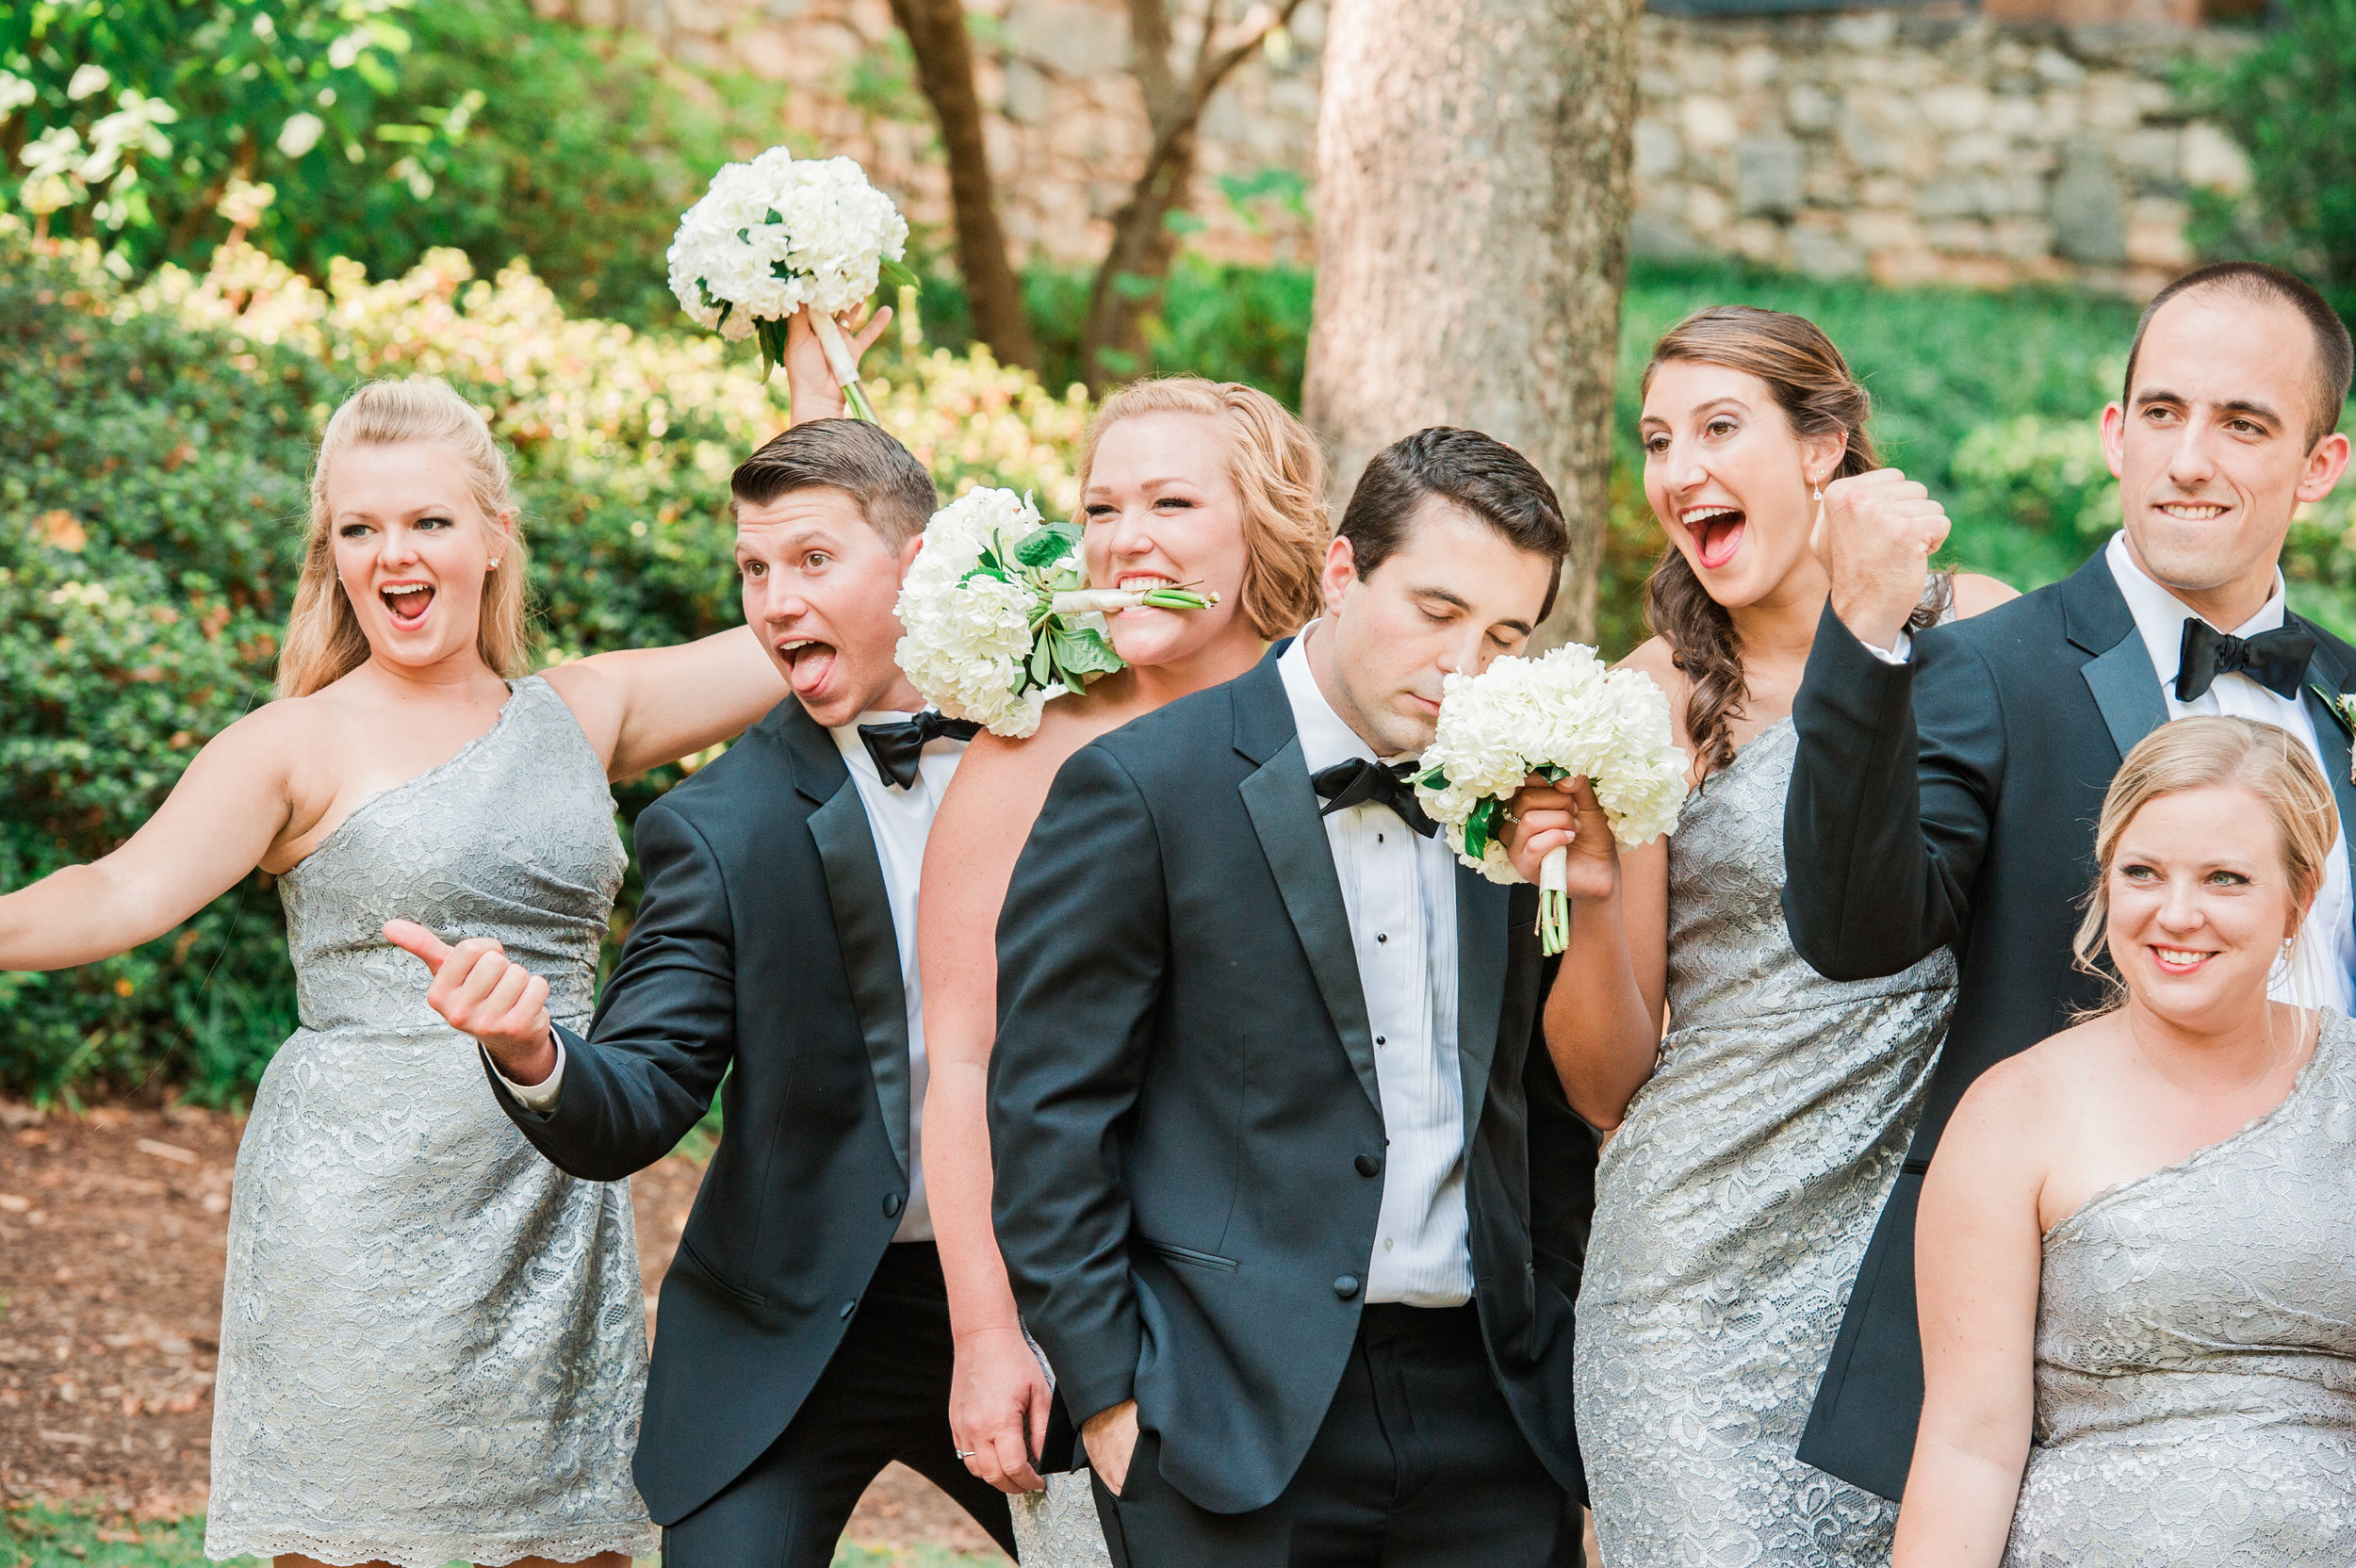  Ashley &amp; Mark had one of thee most fun wedding parties! 